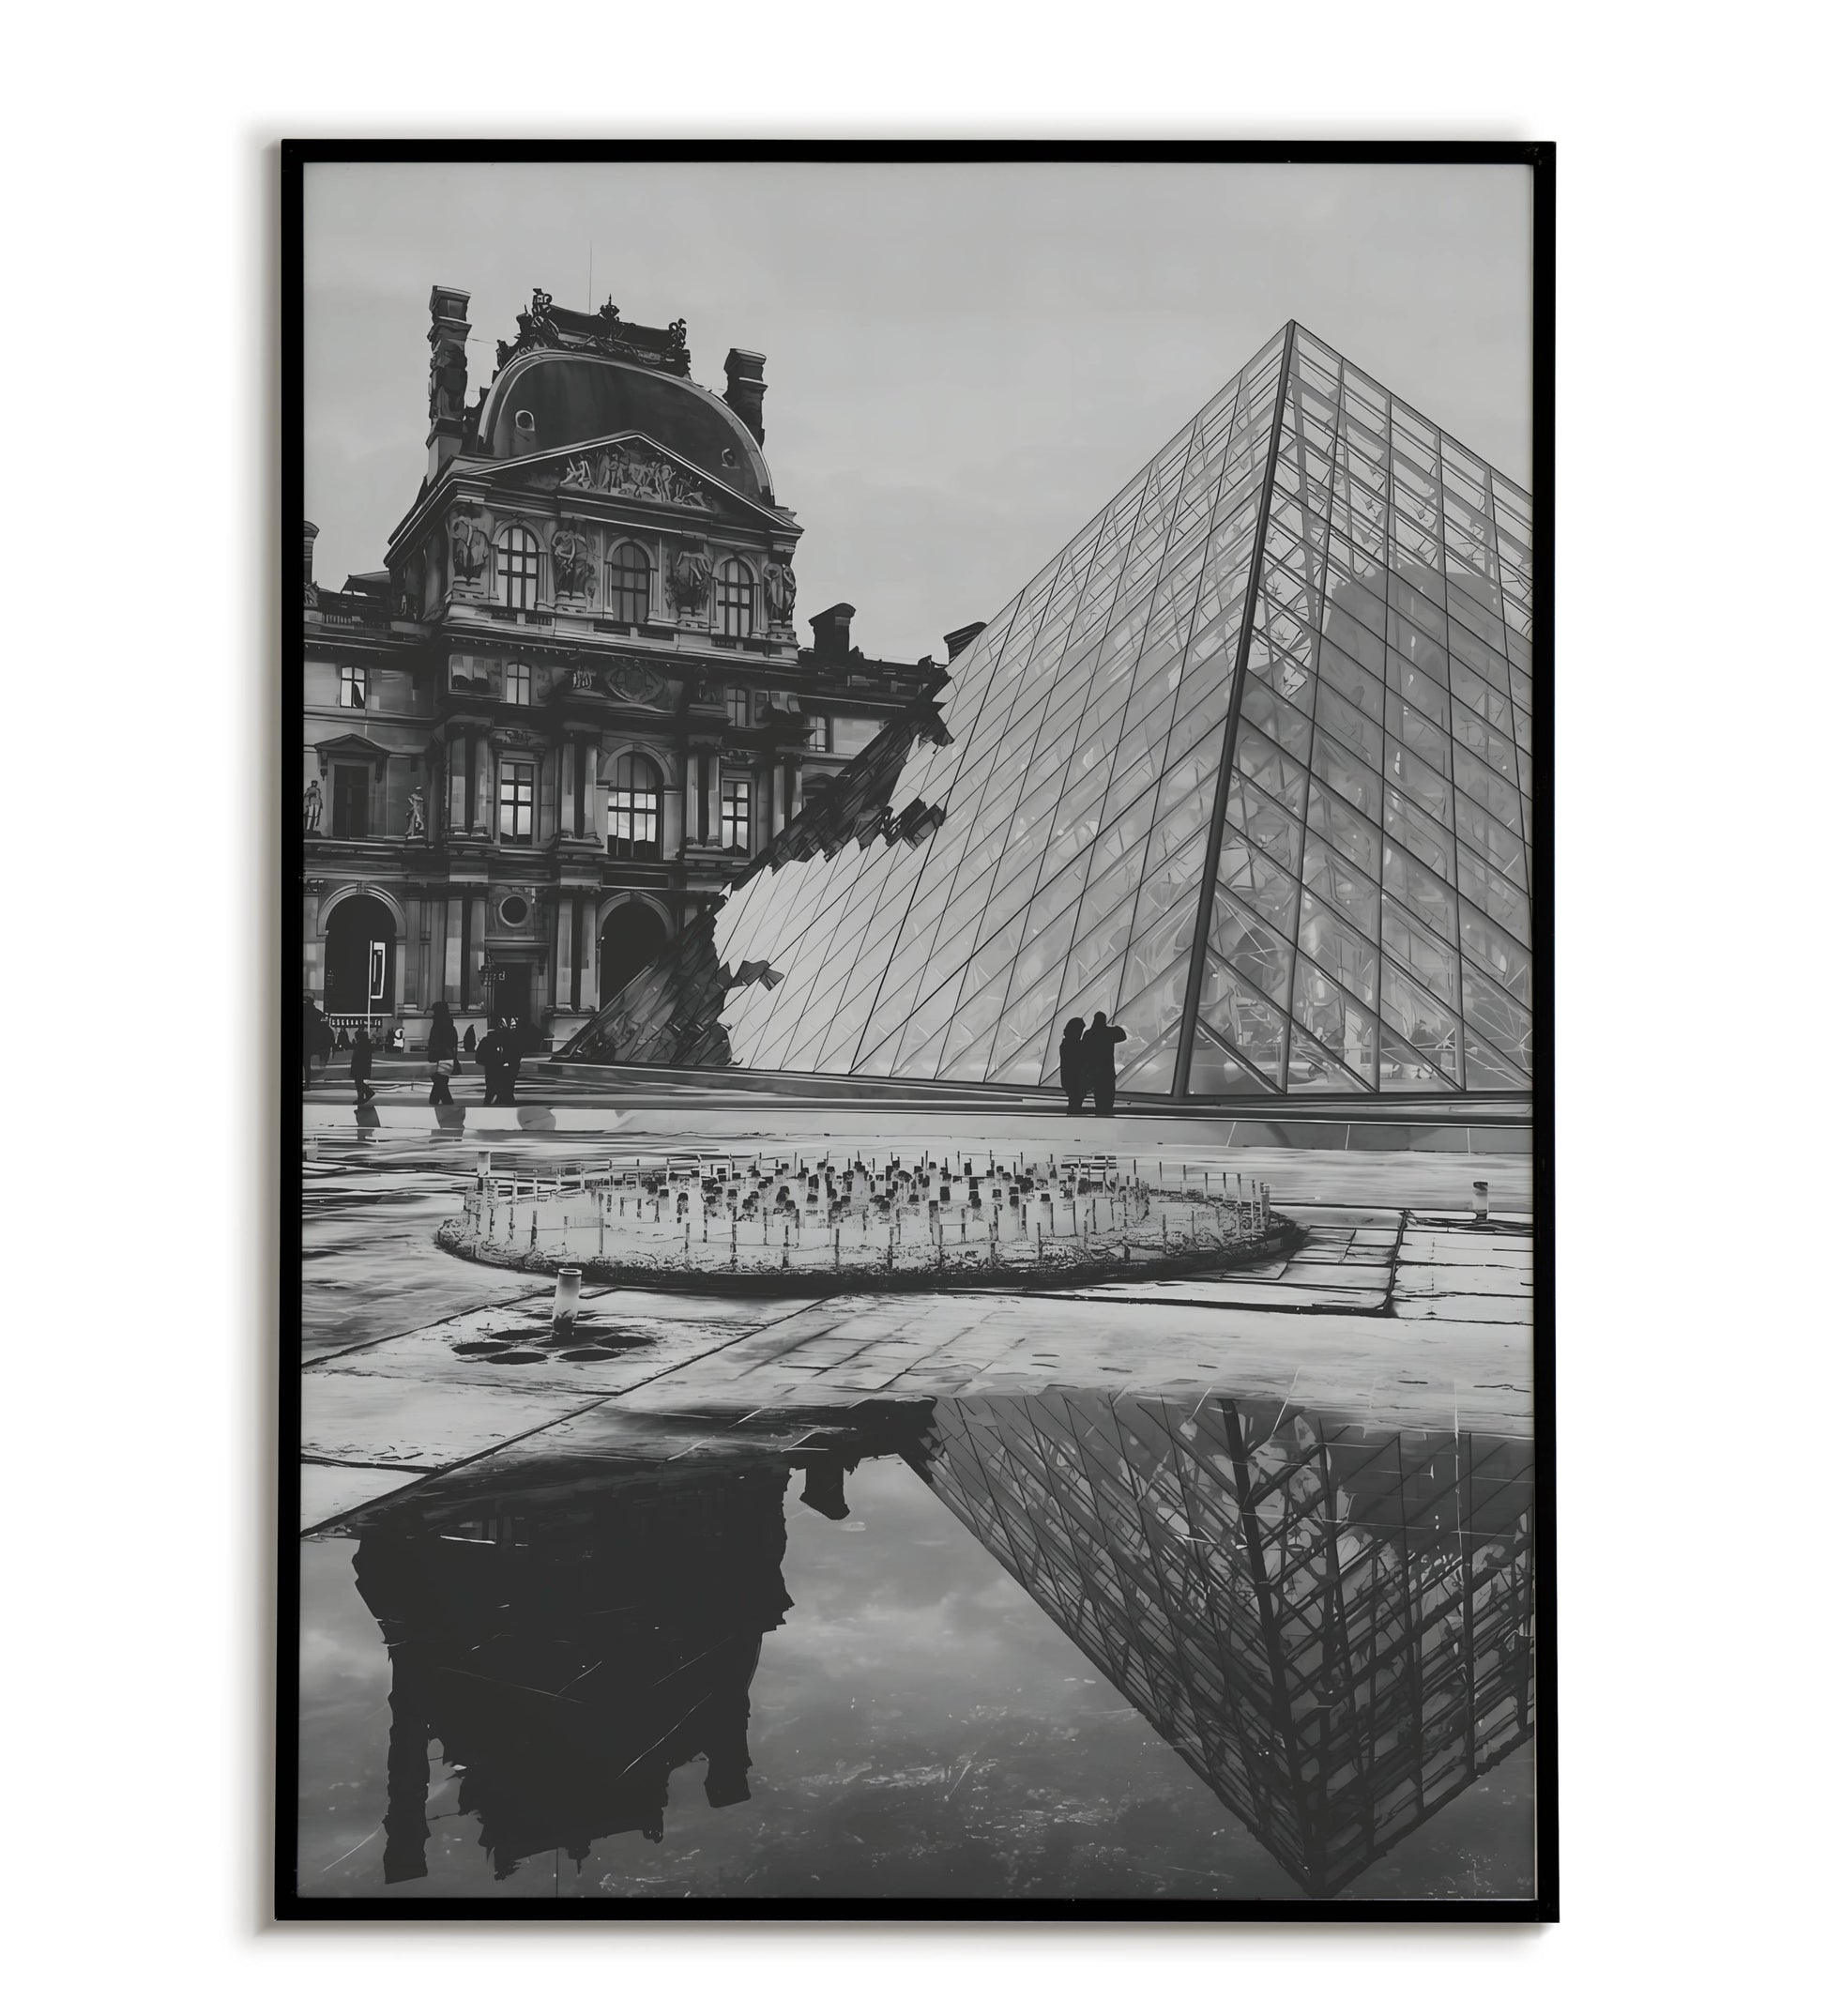 Paris Louvre Museum - Printable Wall Art / Poster. Download this iconic image to add a touch of Parisian flair to your decor.